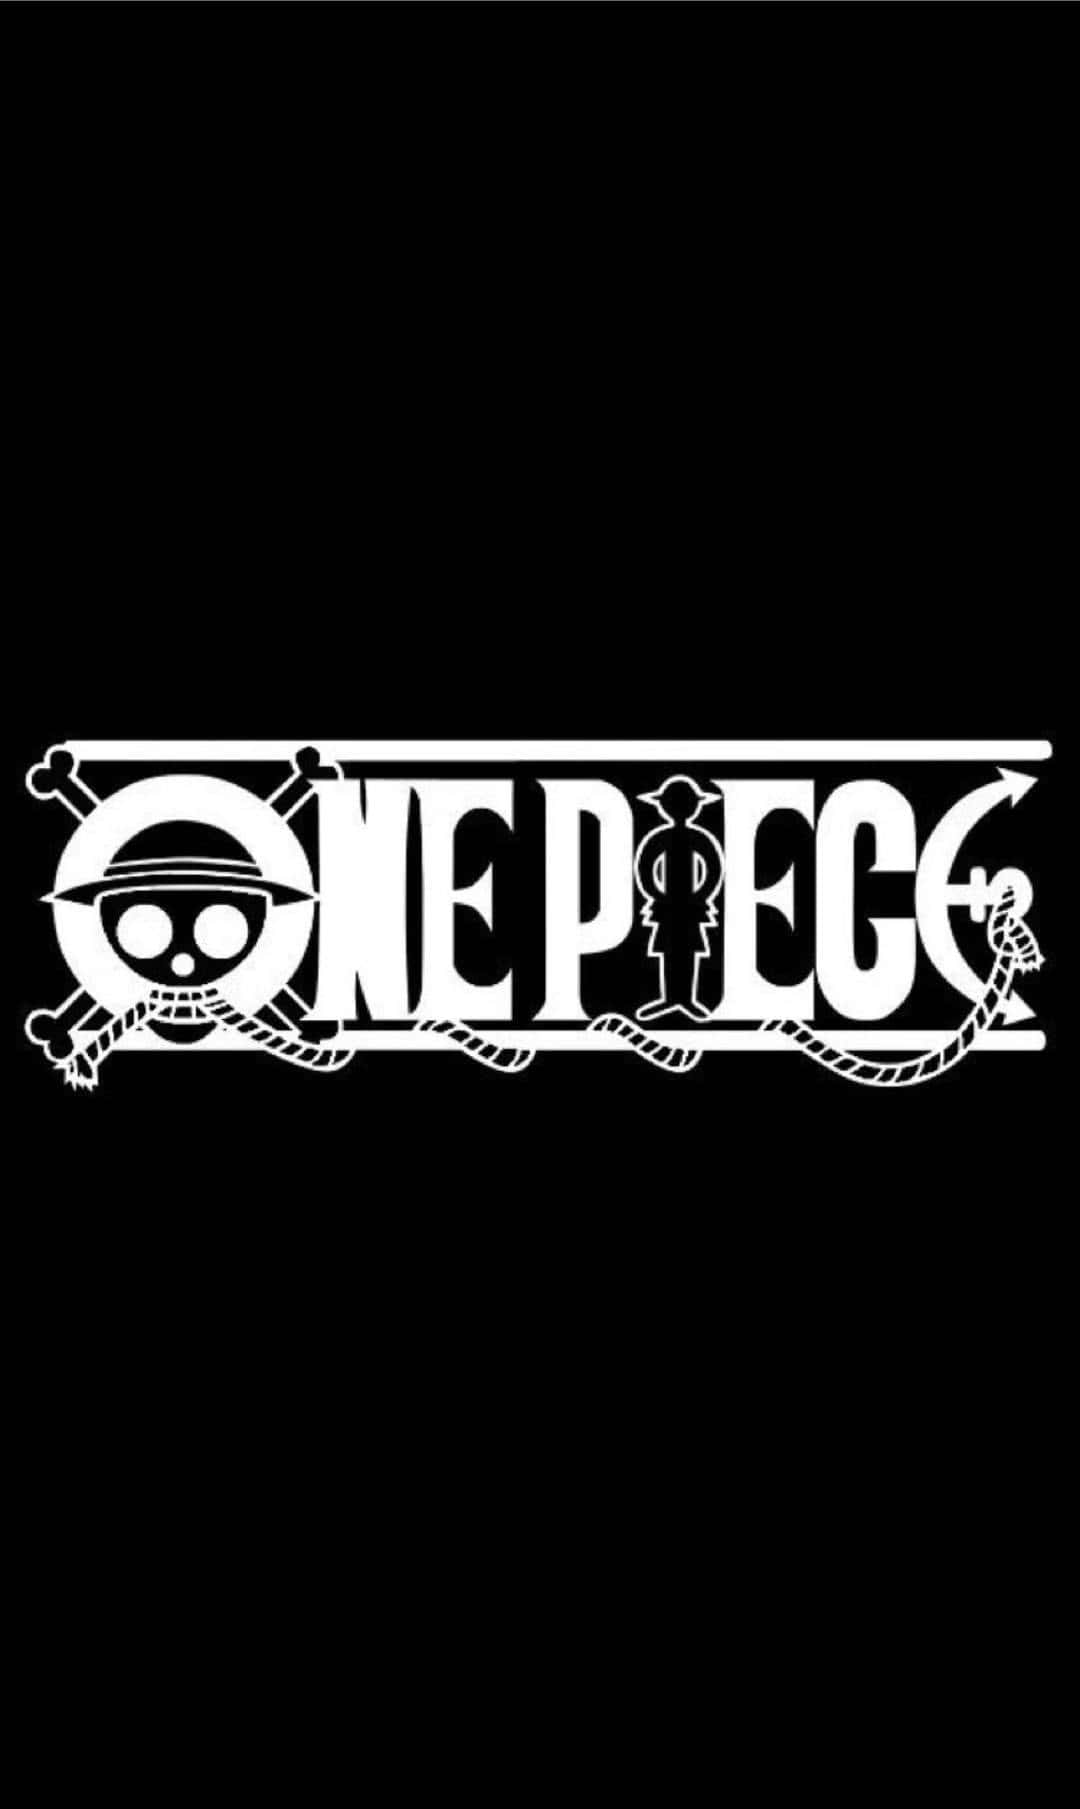 Download One Piece Black And White Anime Logo Wallpaper | Wallpapers.com